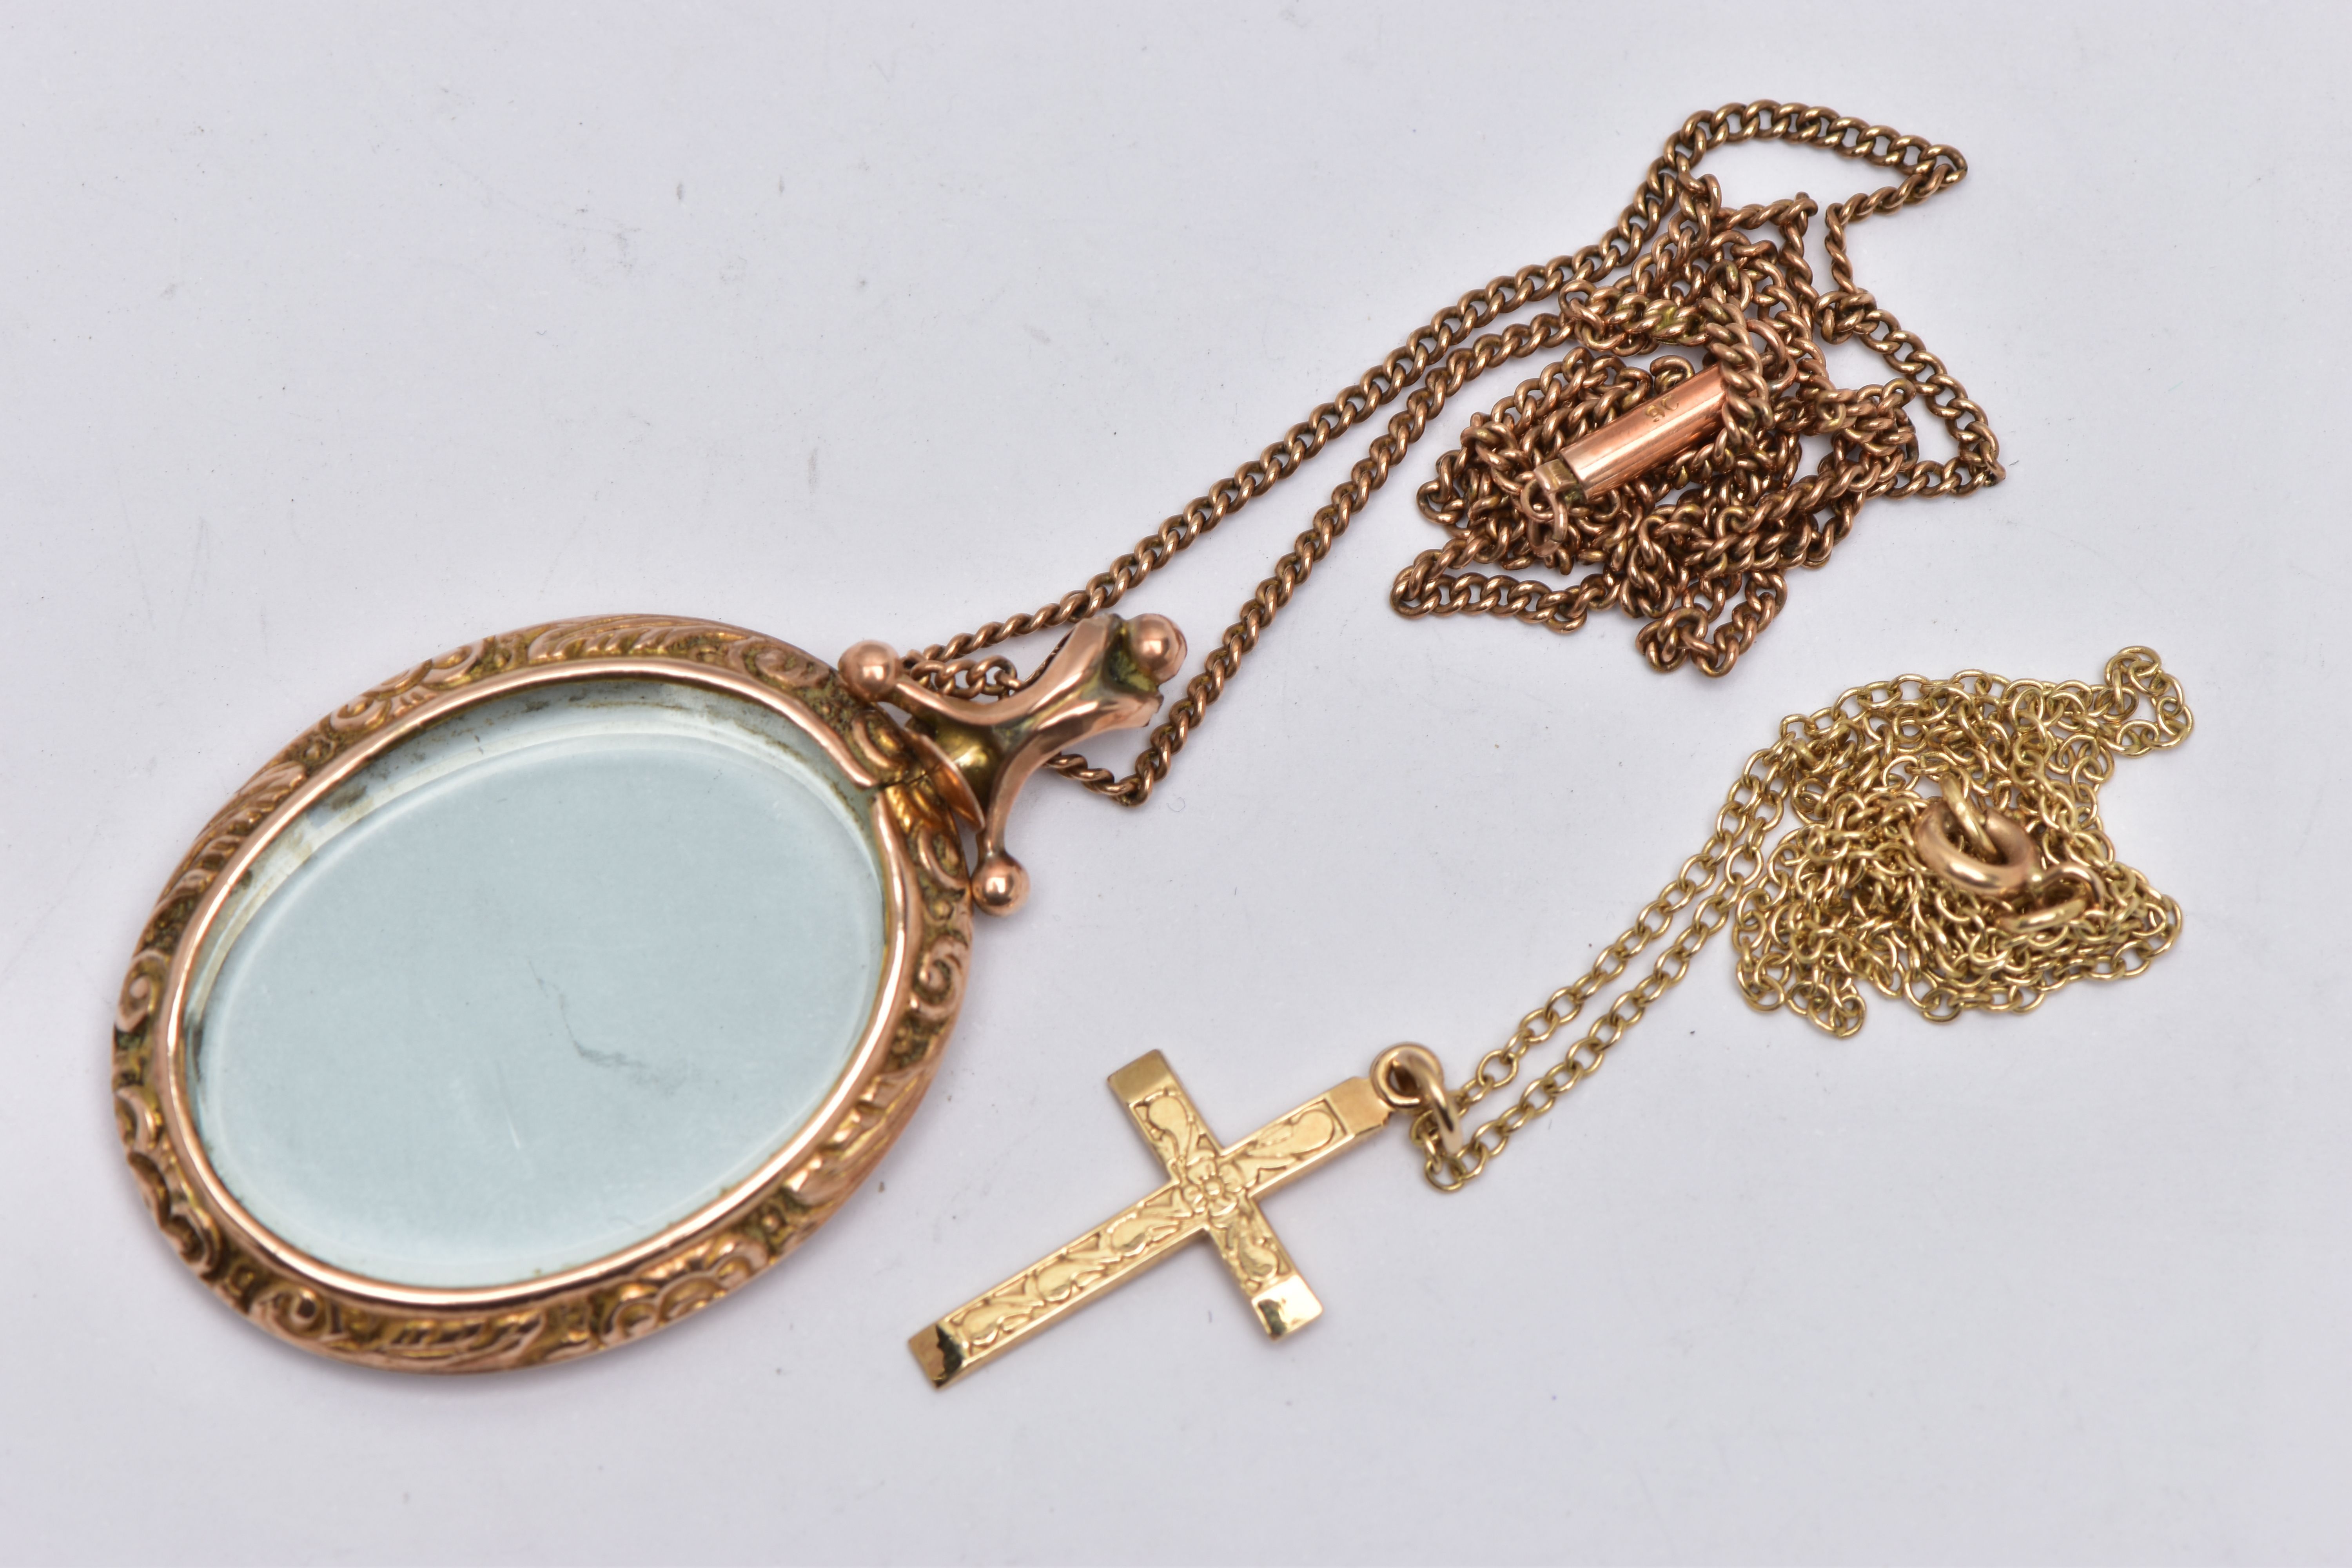 AN EARLY 20TH CENTURY 9CT GOLD PENDANT WITH 9CT GOLD CHAIN, A 9CT GOLD CROSS PENDANT WITH 9CT GOLD